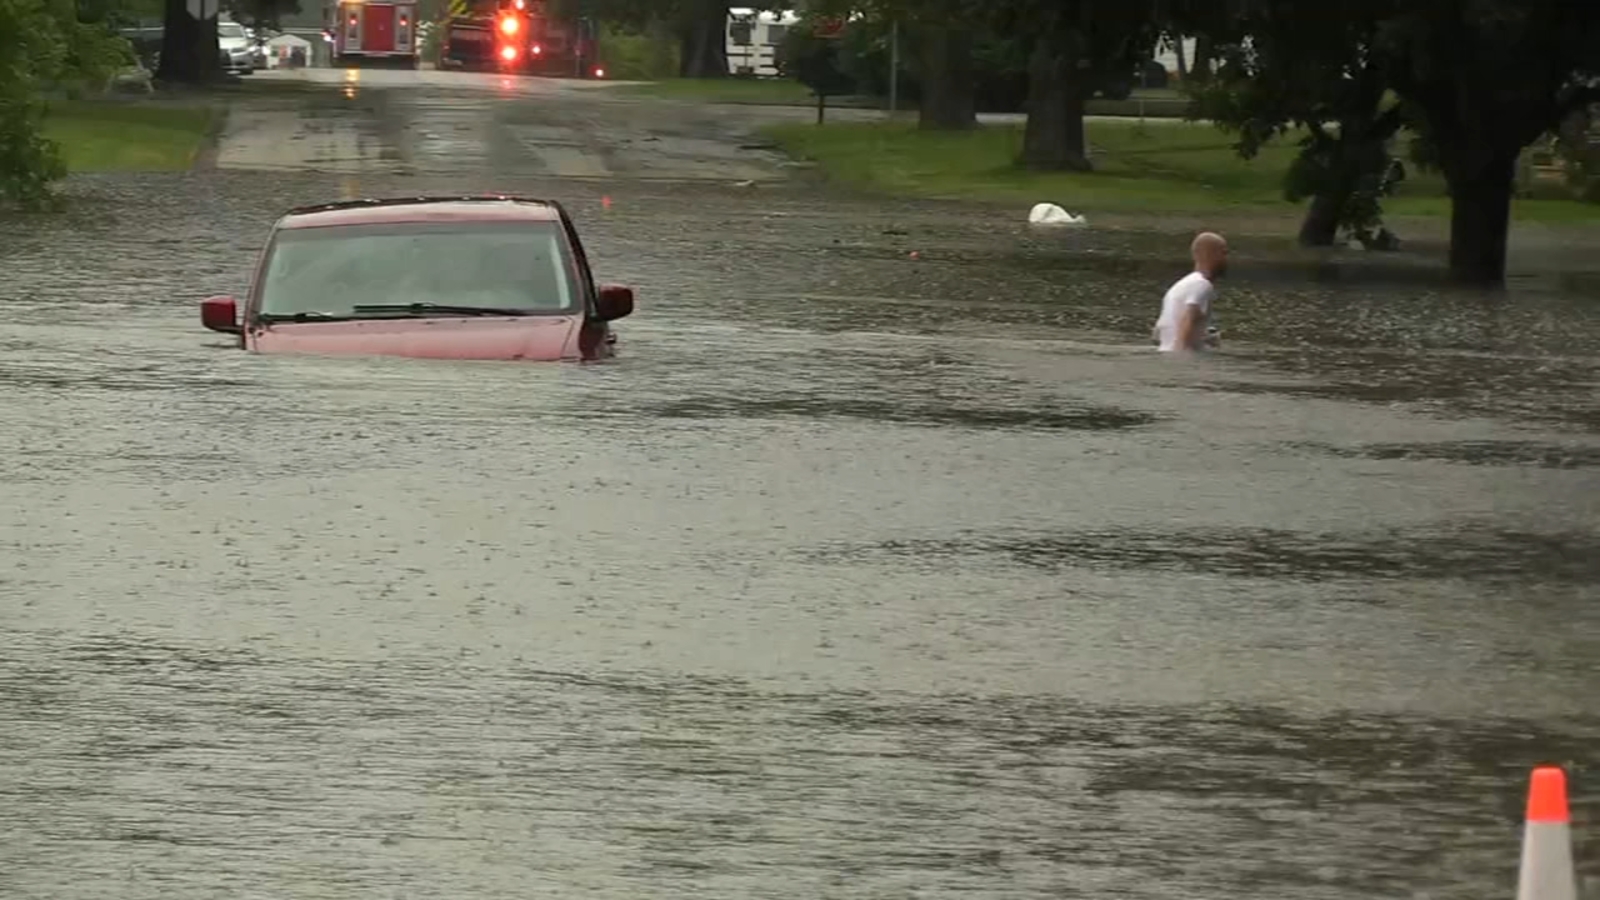  Gibson City, Illinois hit with over 9 inches of rain in 6 hours: 'The entire town's flooded' 